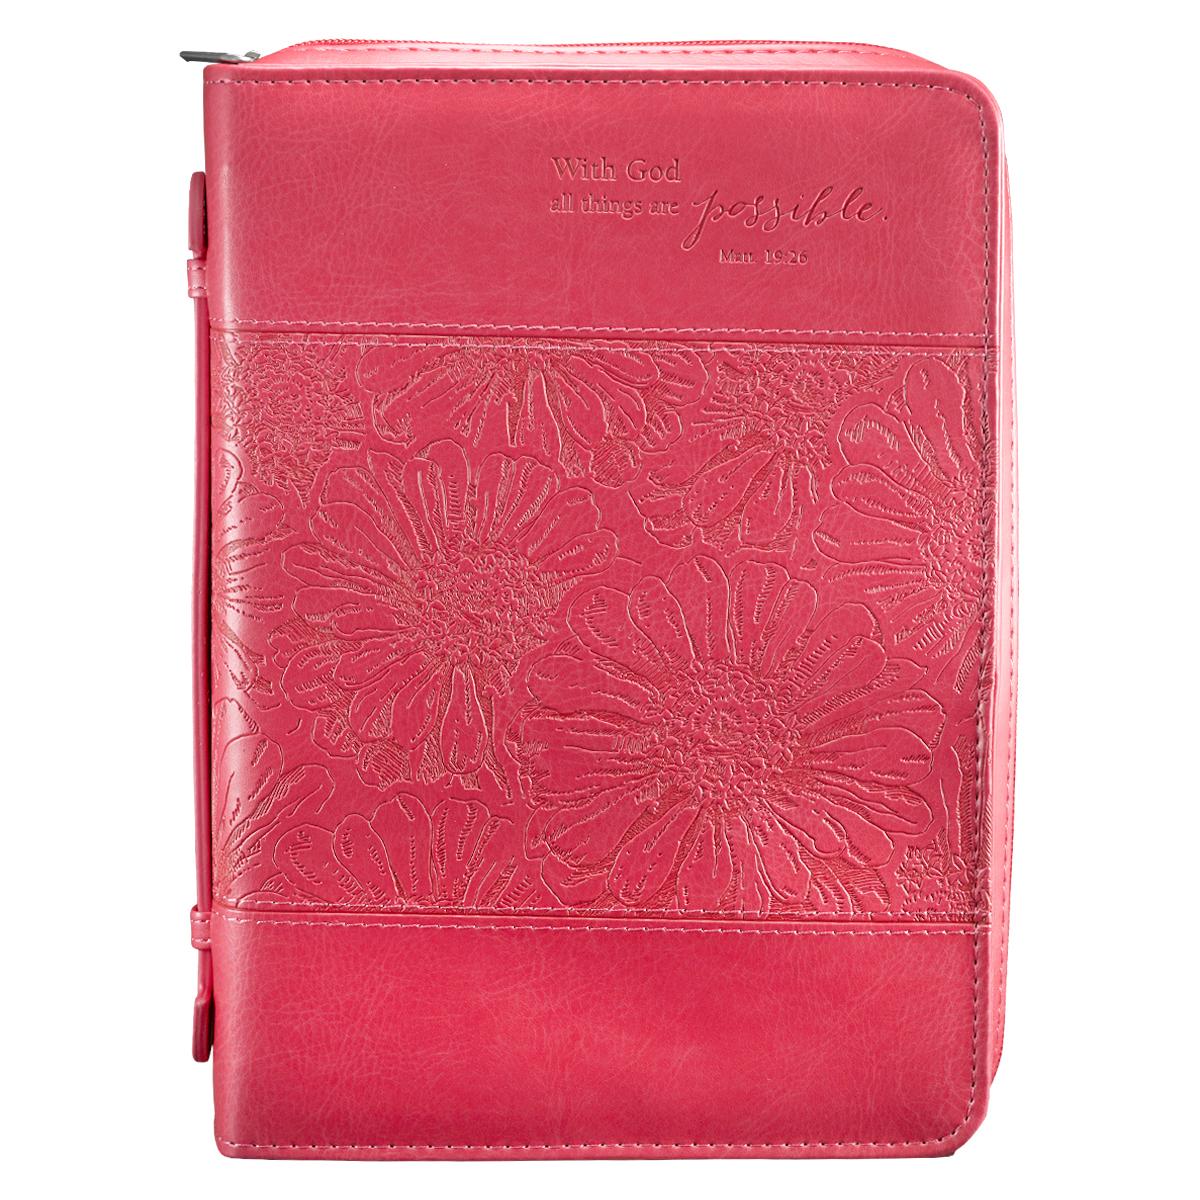 POCHETTE BIBLE, L, WITH GOD ALL THINGS […] MATT 19.26 ROSE - SIMILICUIR